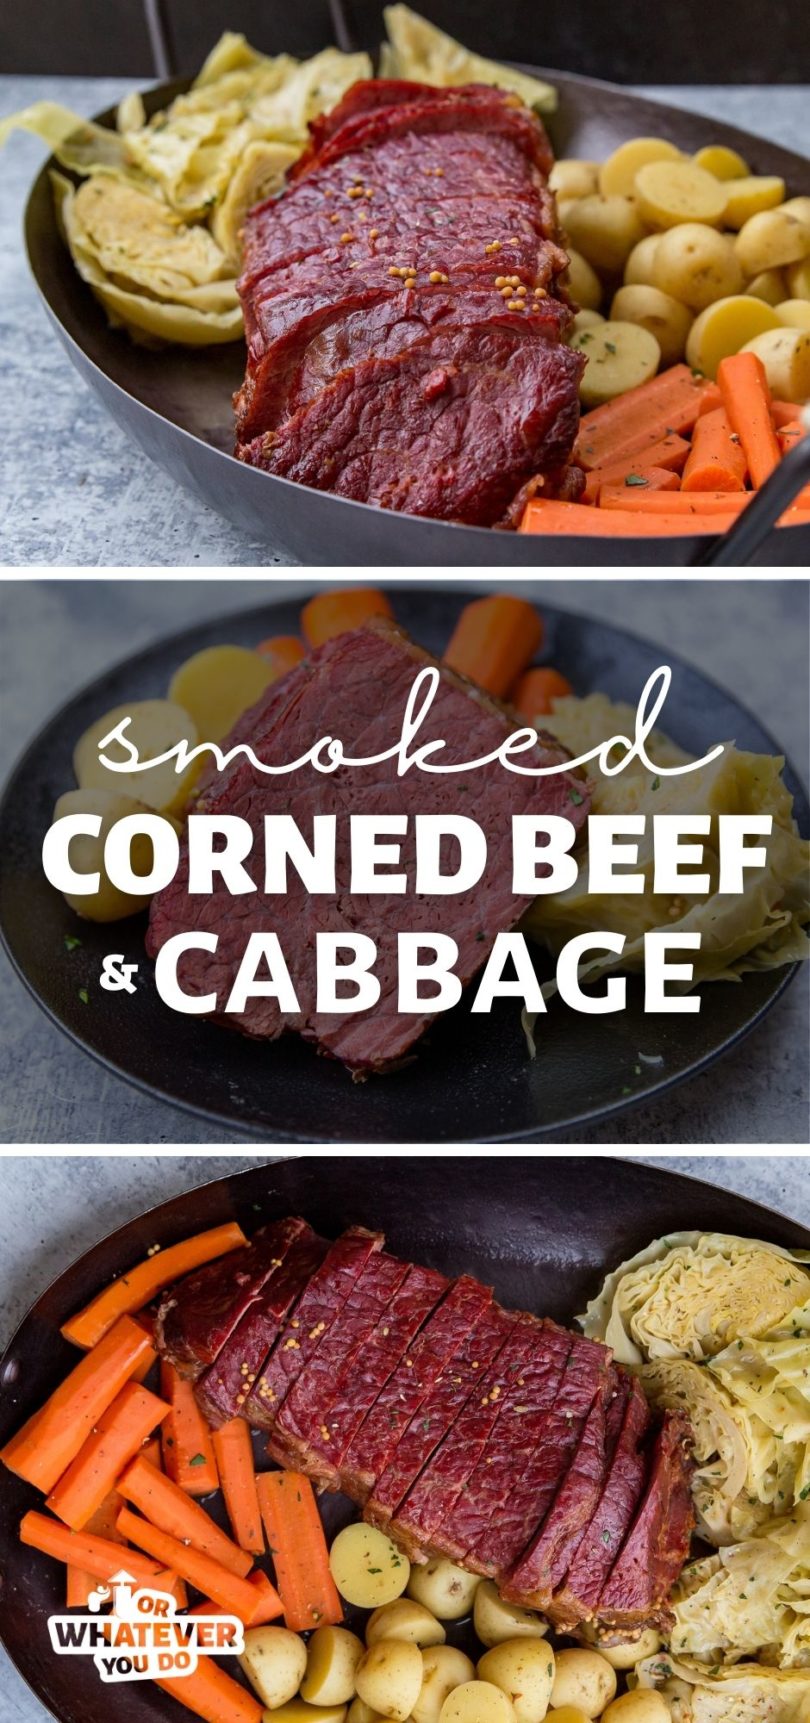 Traeger Smoked Corned Beef and Cabbage